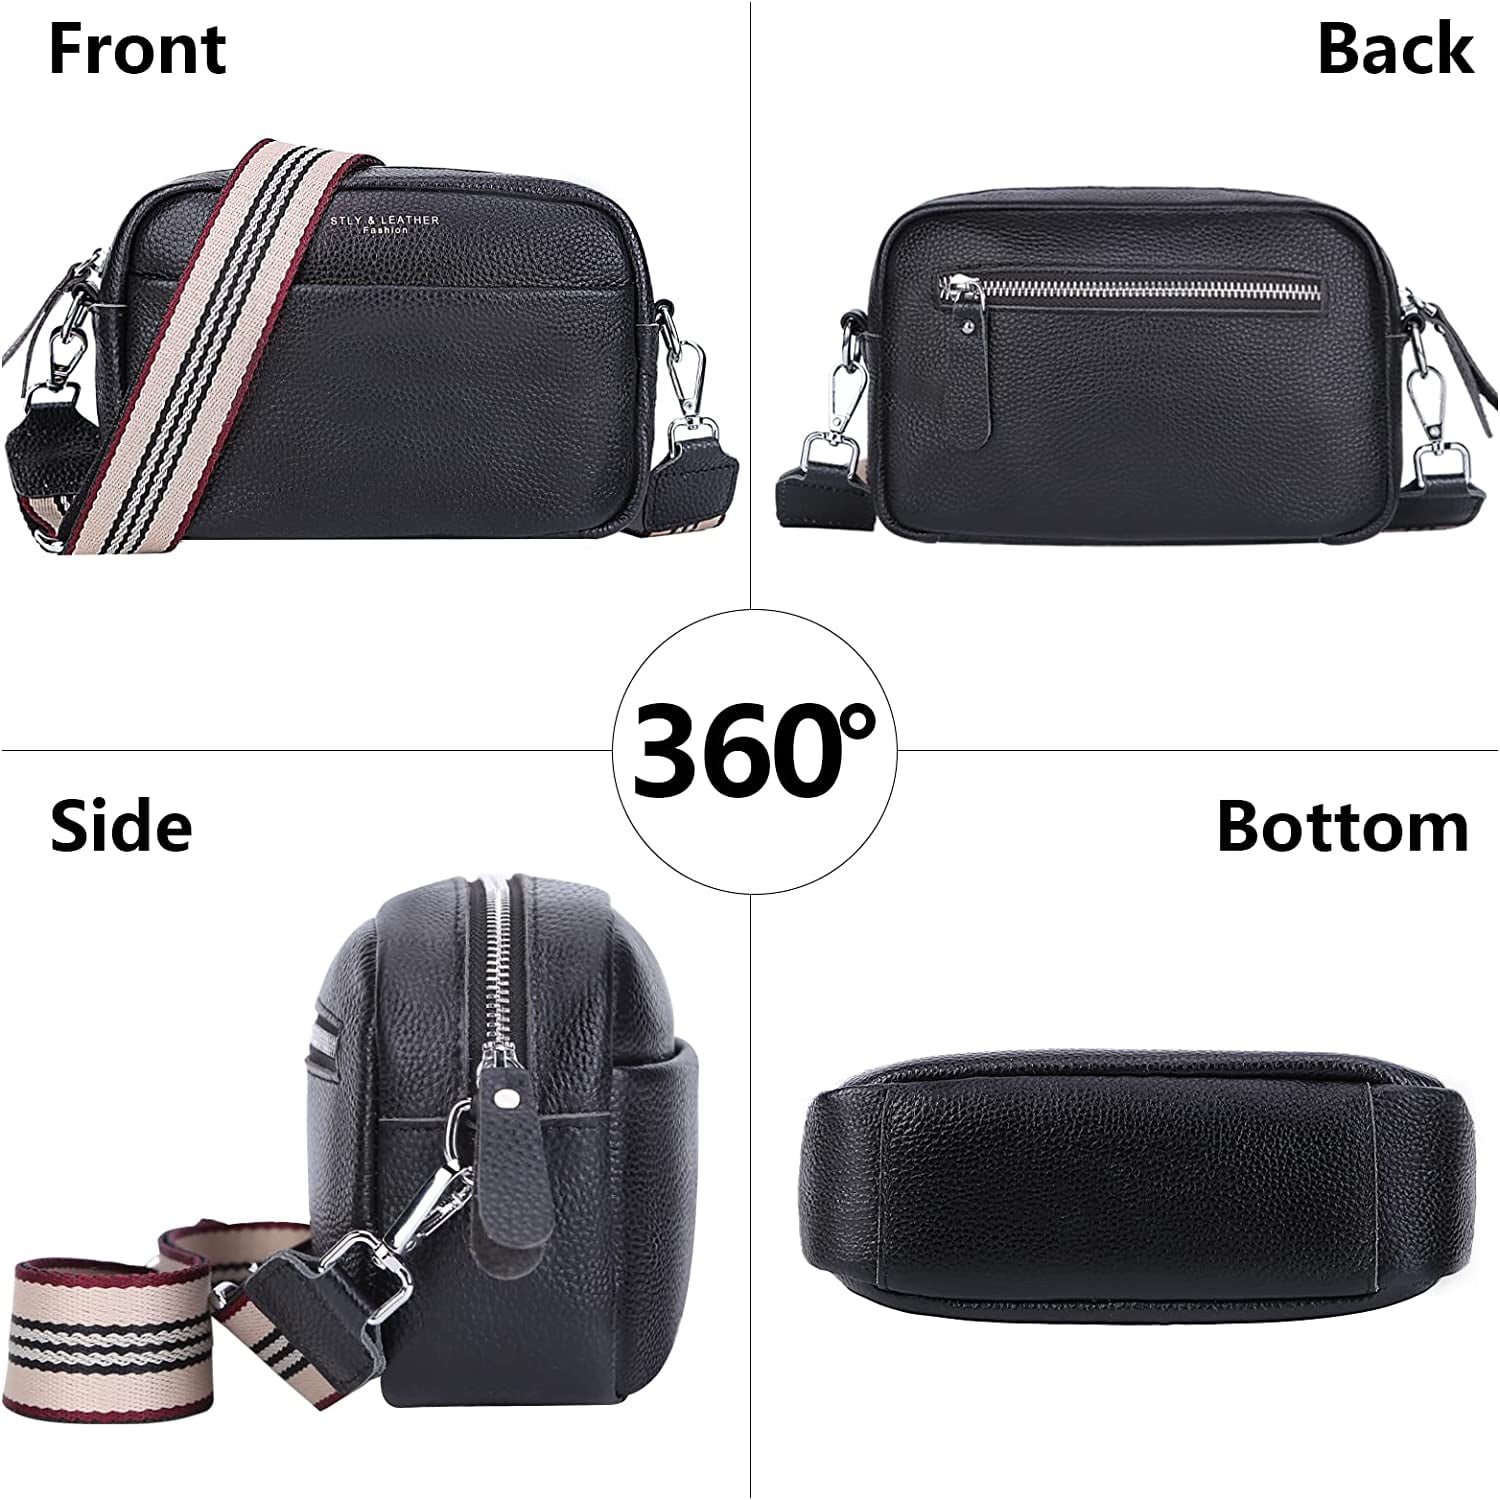 Yuanbang Crossbody Bag Women's Bum Bag Leather with Wide Shoulder Strap, Small Shoulder Bag with Zip and Interchangeable Shoulder Strap for Travel